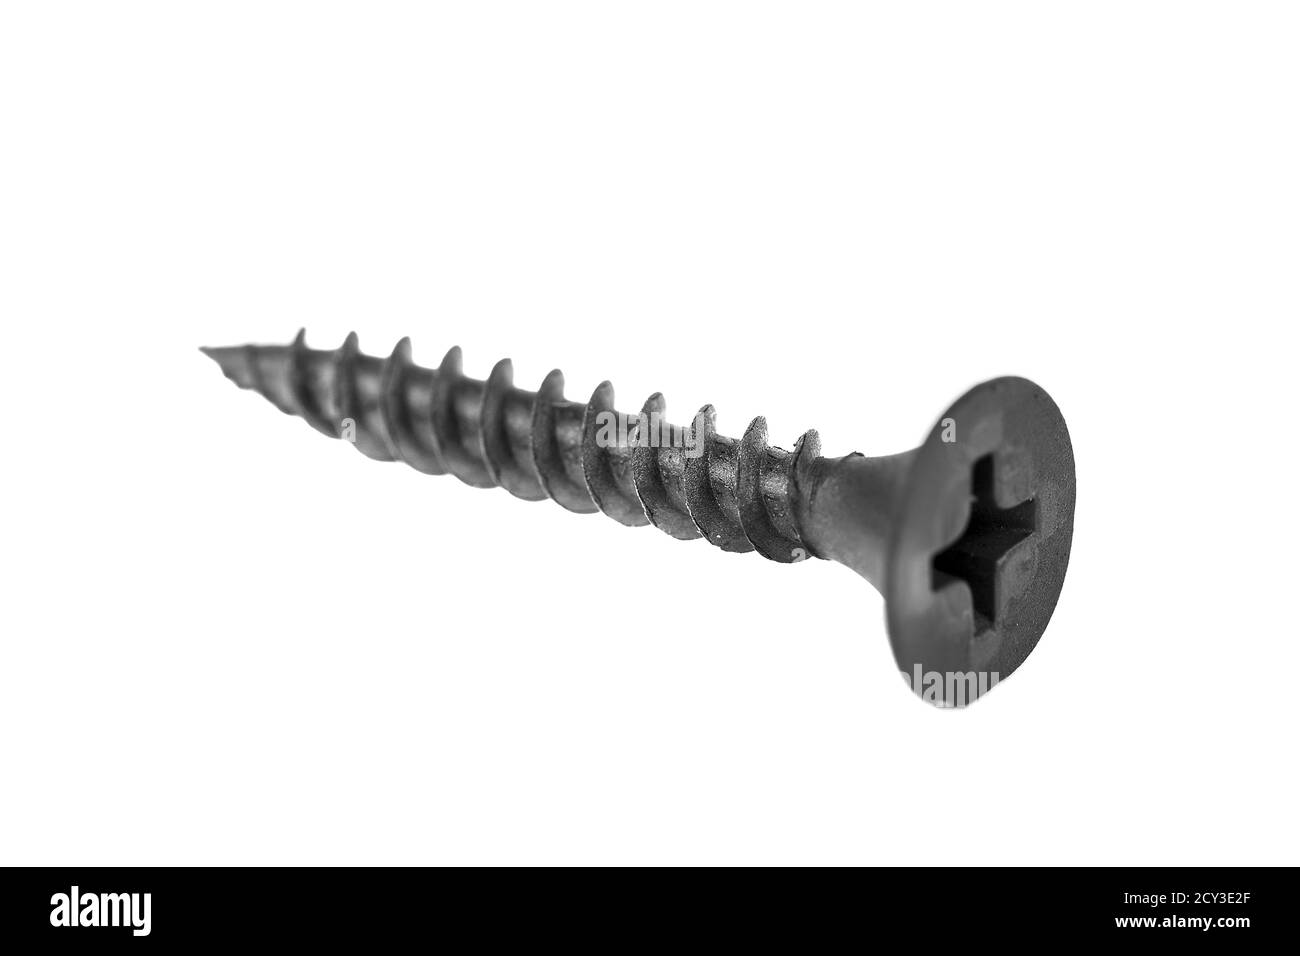 Metal self-tapping or screw close-up isolated on white background. Stock Photo